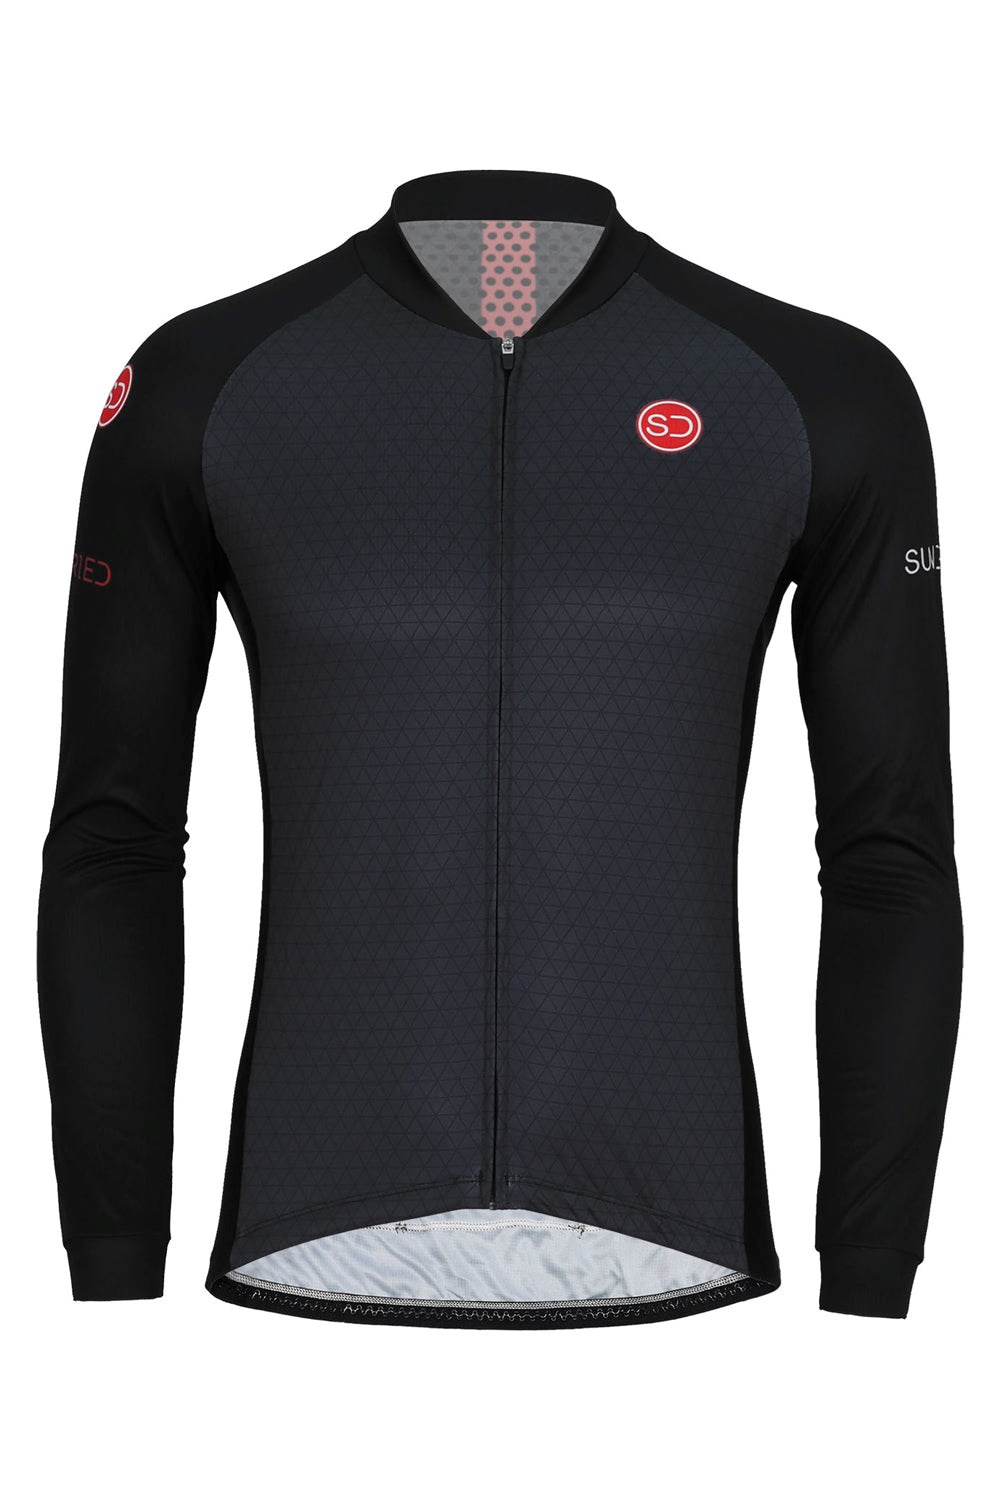 Century Mens Long Sleeve Cycle Jersey -